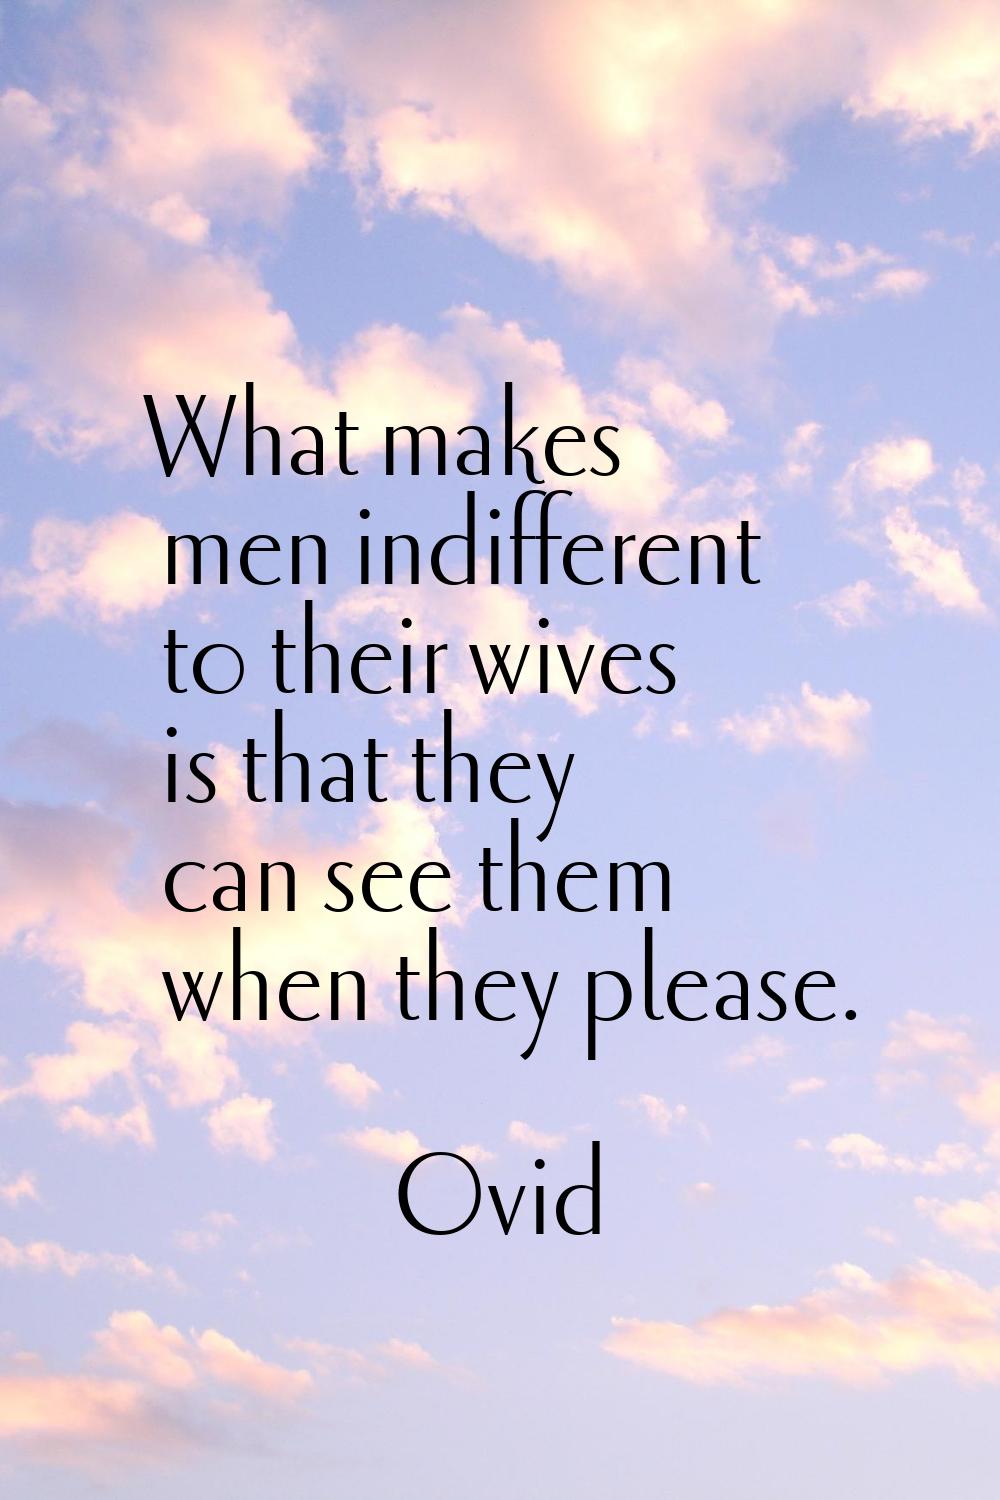 What makes men indifferent to their wives is that they can see them when they please.